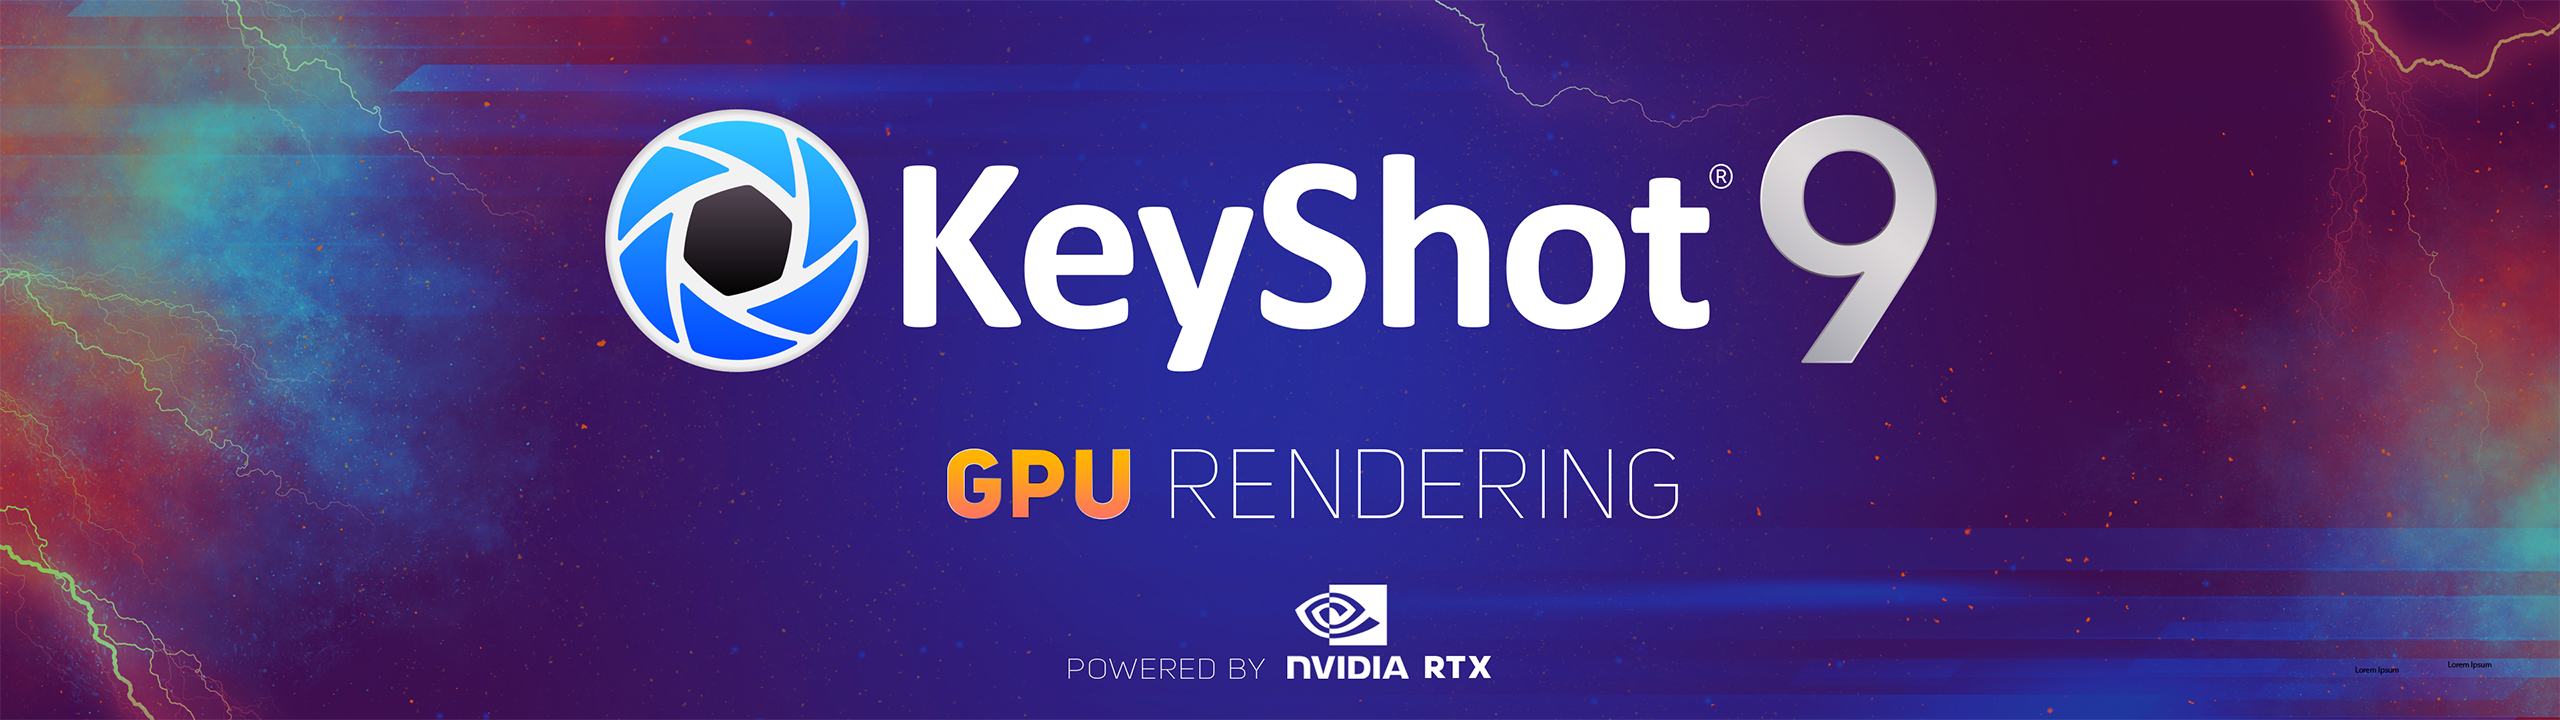 KeyShot 9: Support for NVIDIA RTX Ray Tracing and AI Denoising Coming Soon